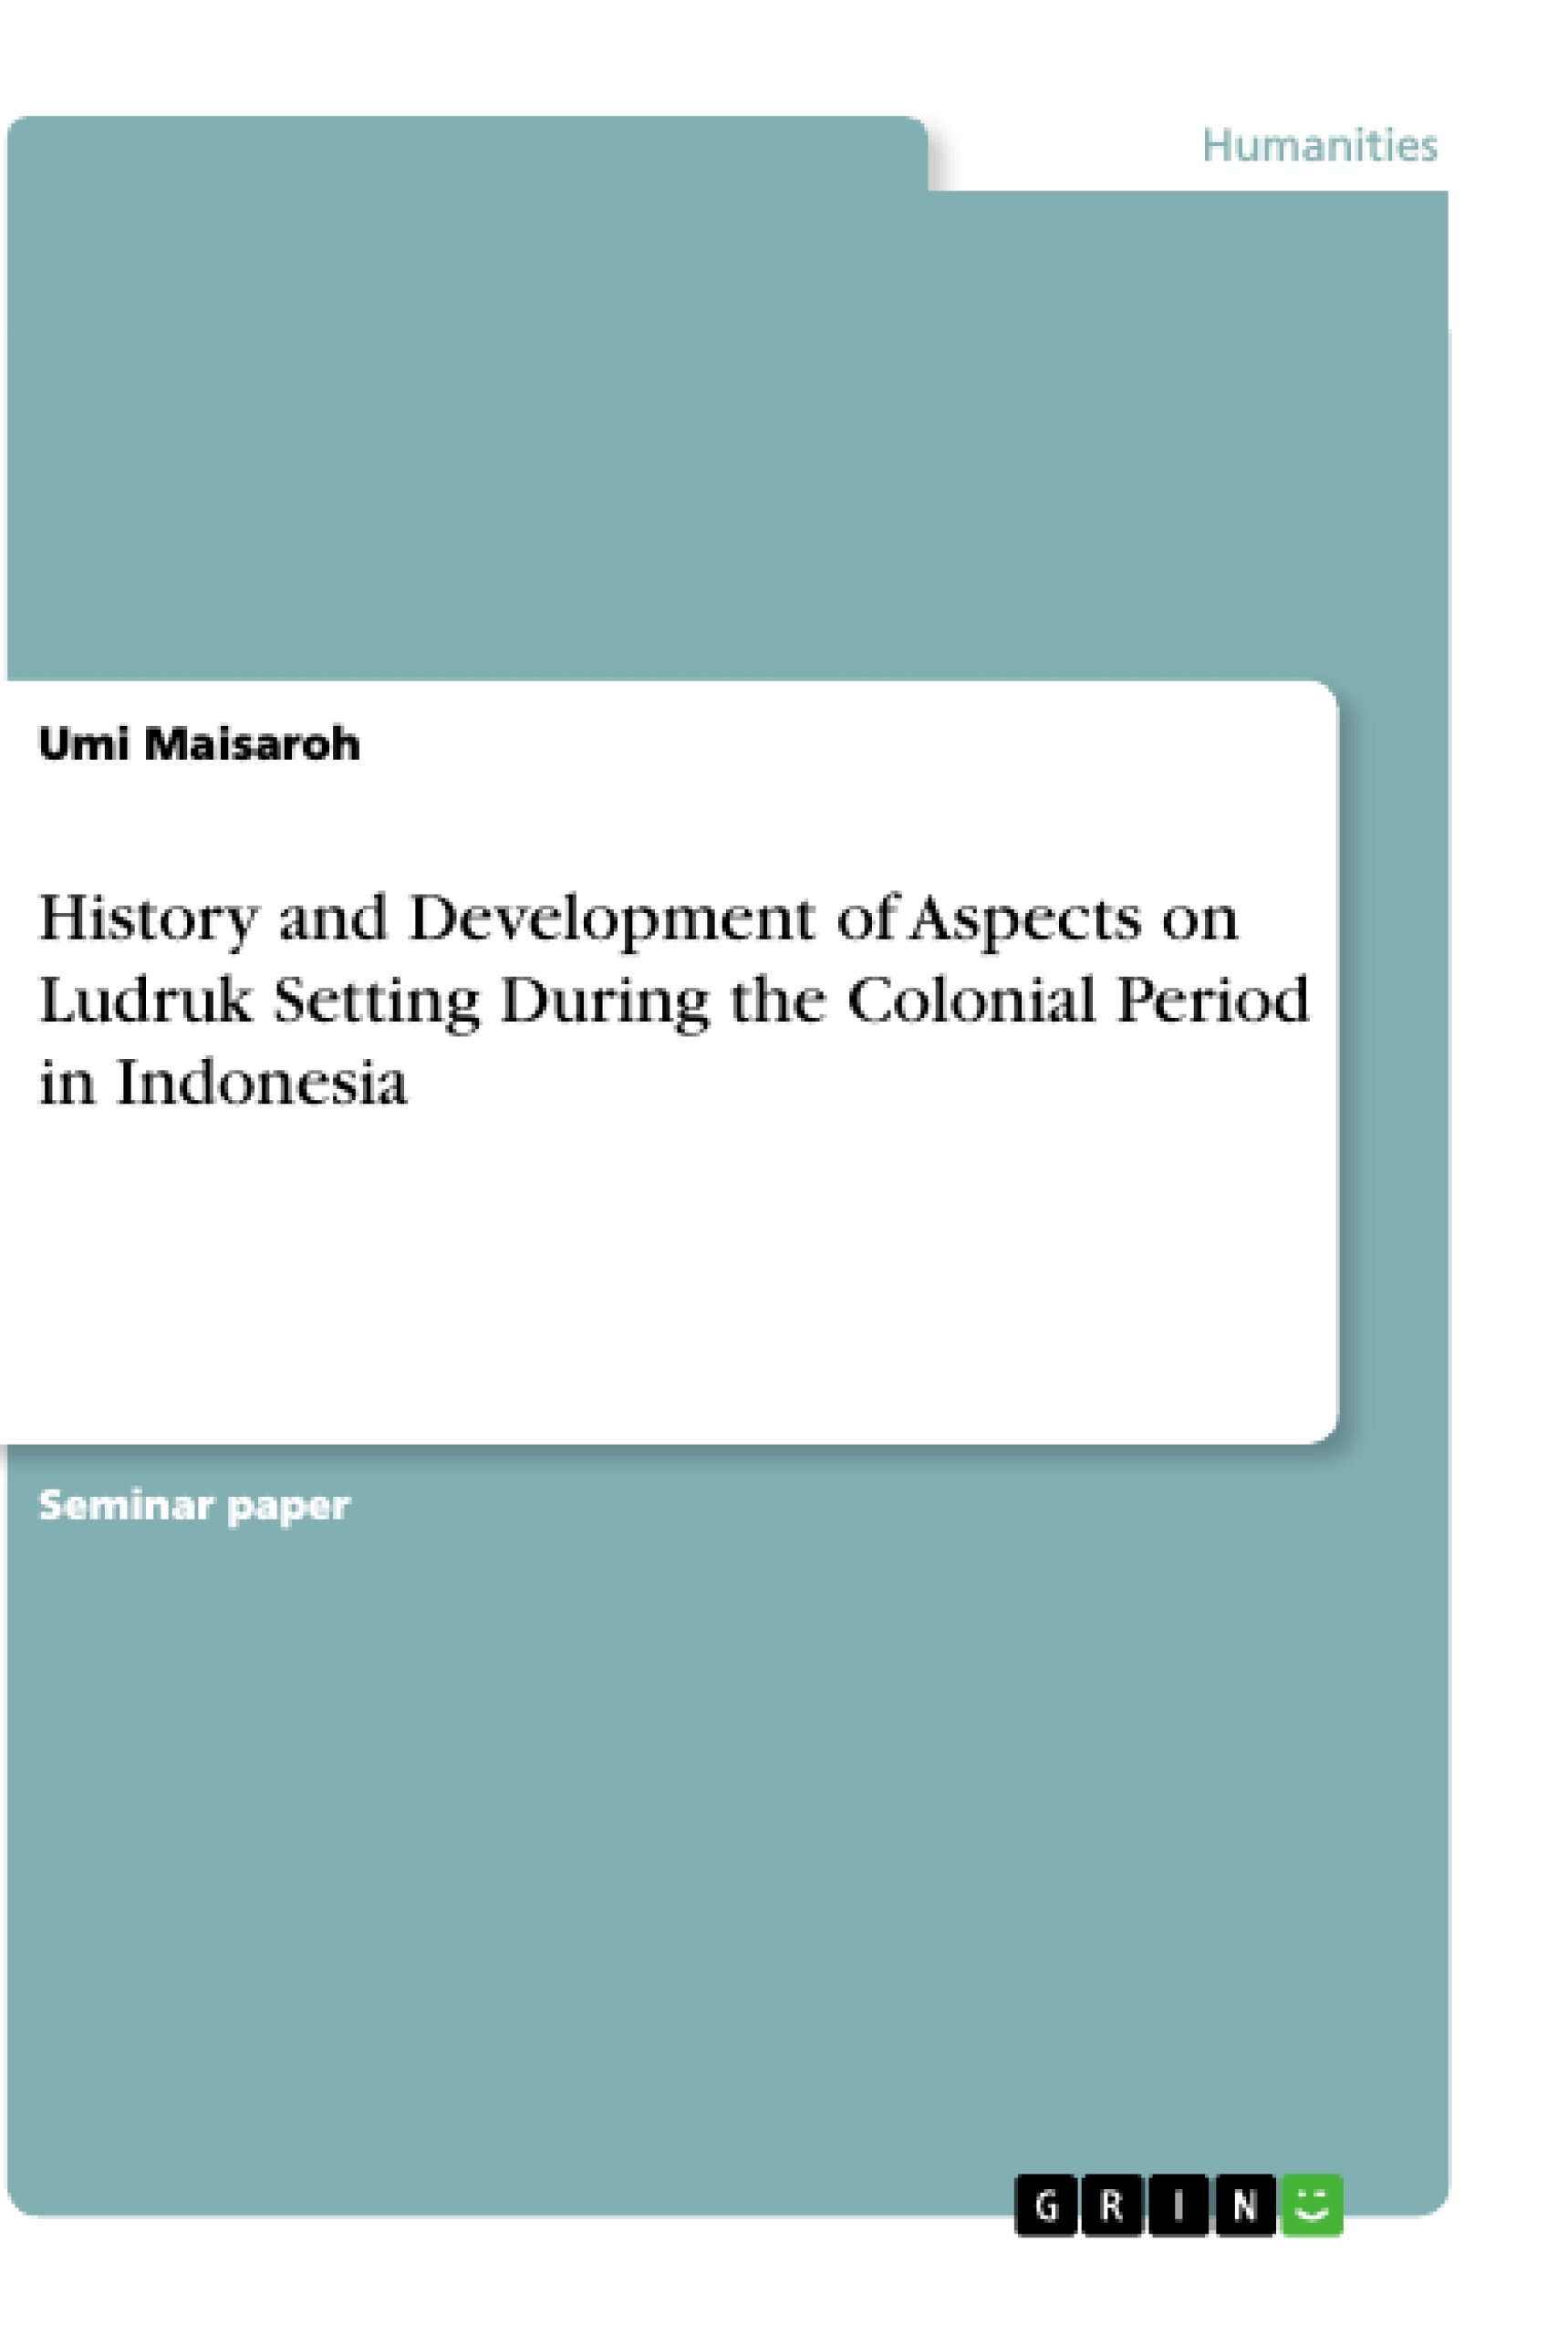 Titre: History and Development of Aspects on Ludruk Setting During the Colonial Period in Indonesia